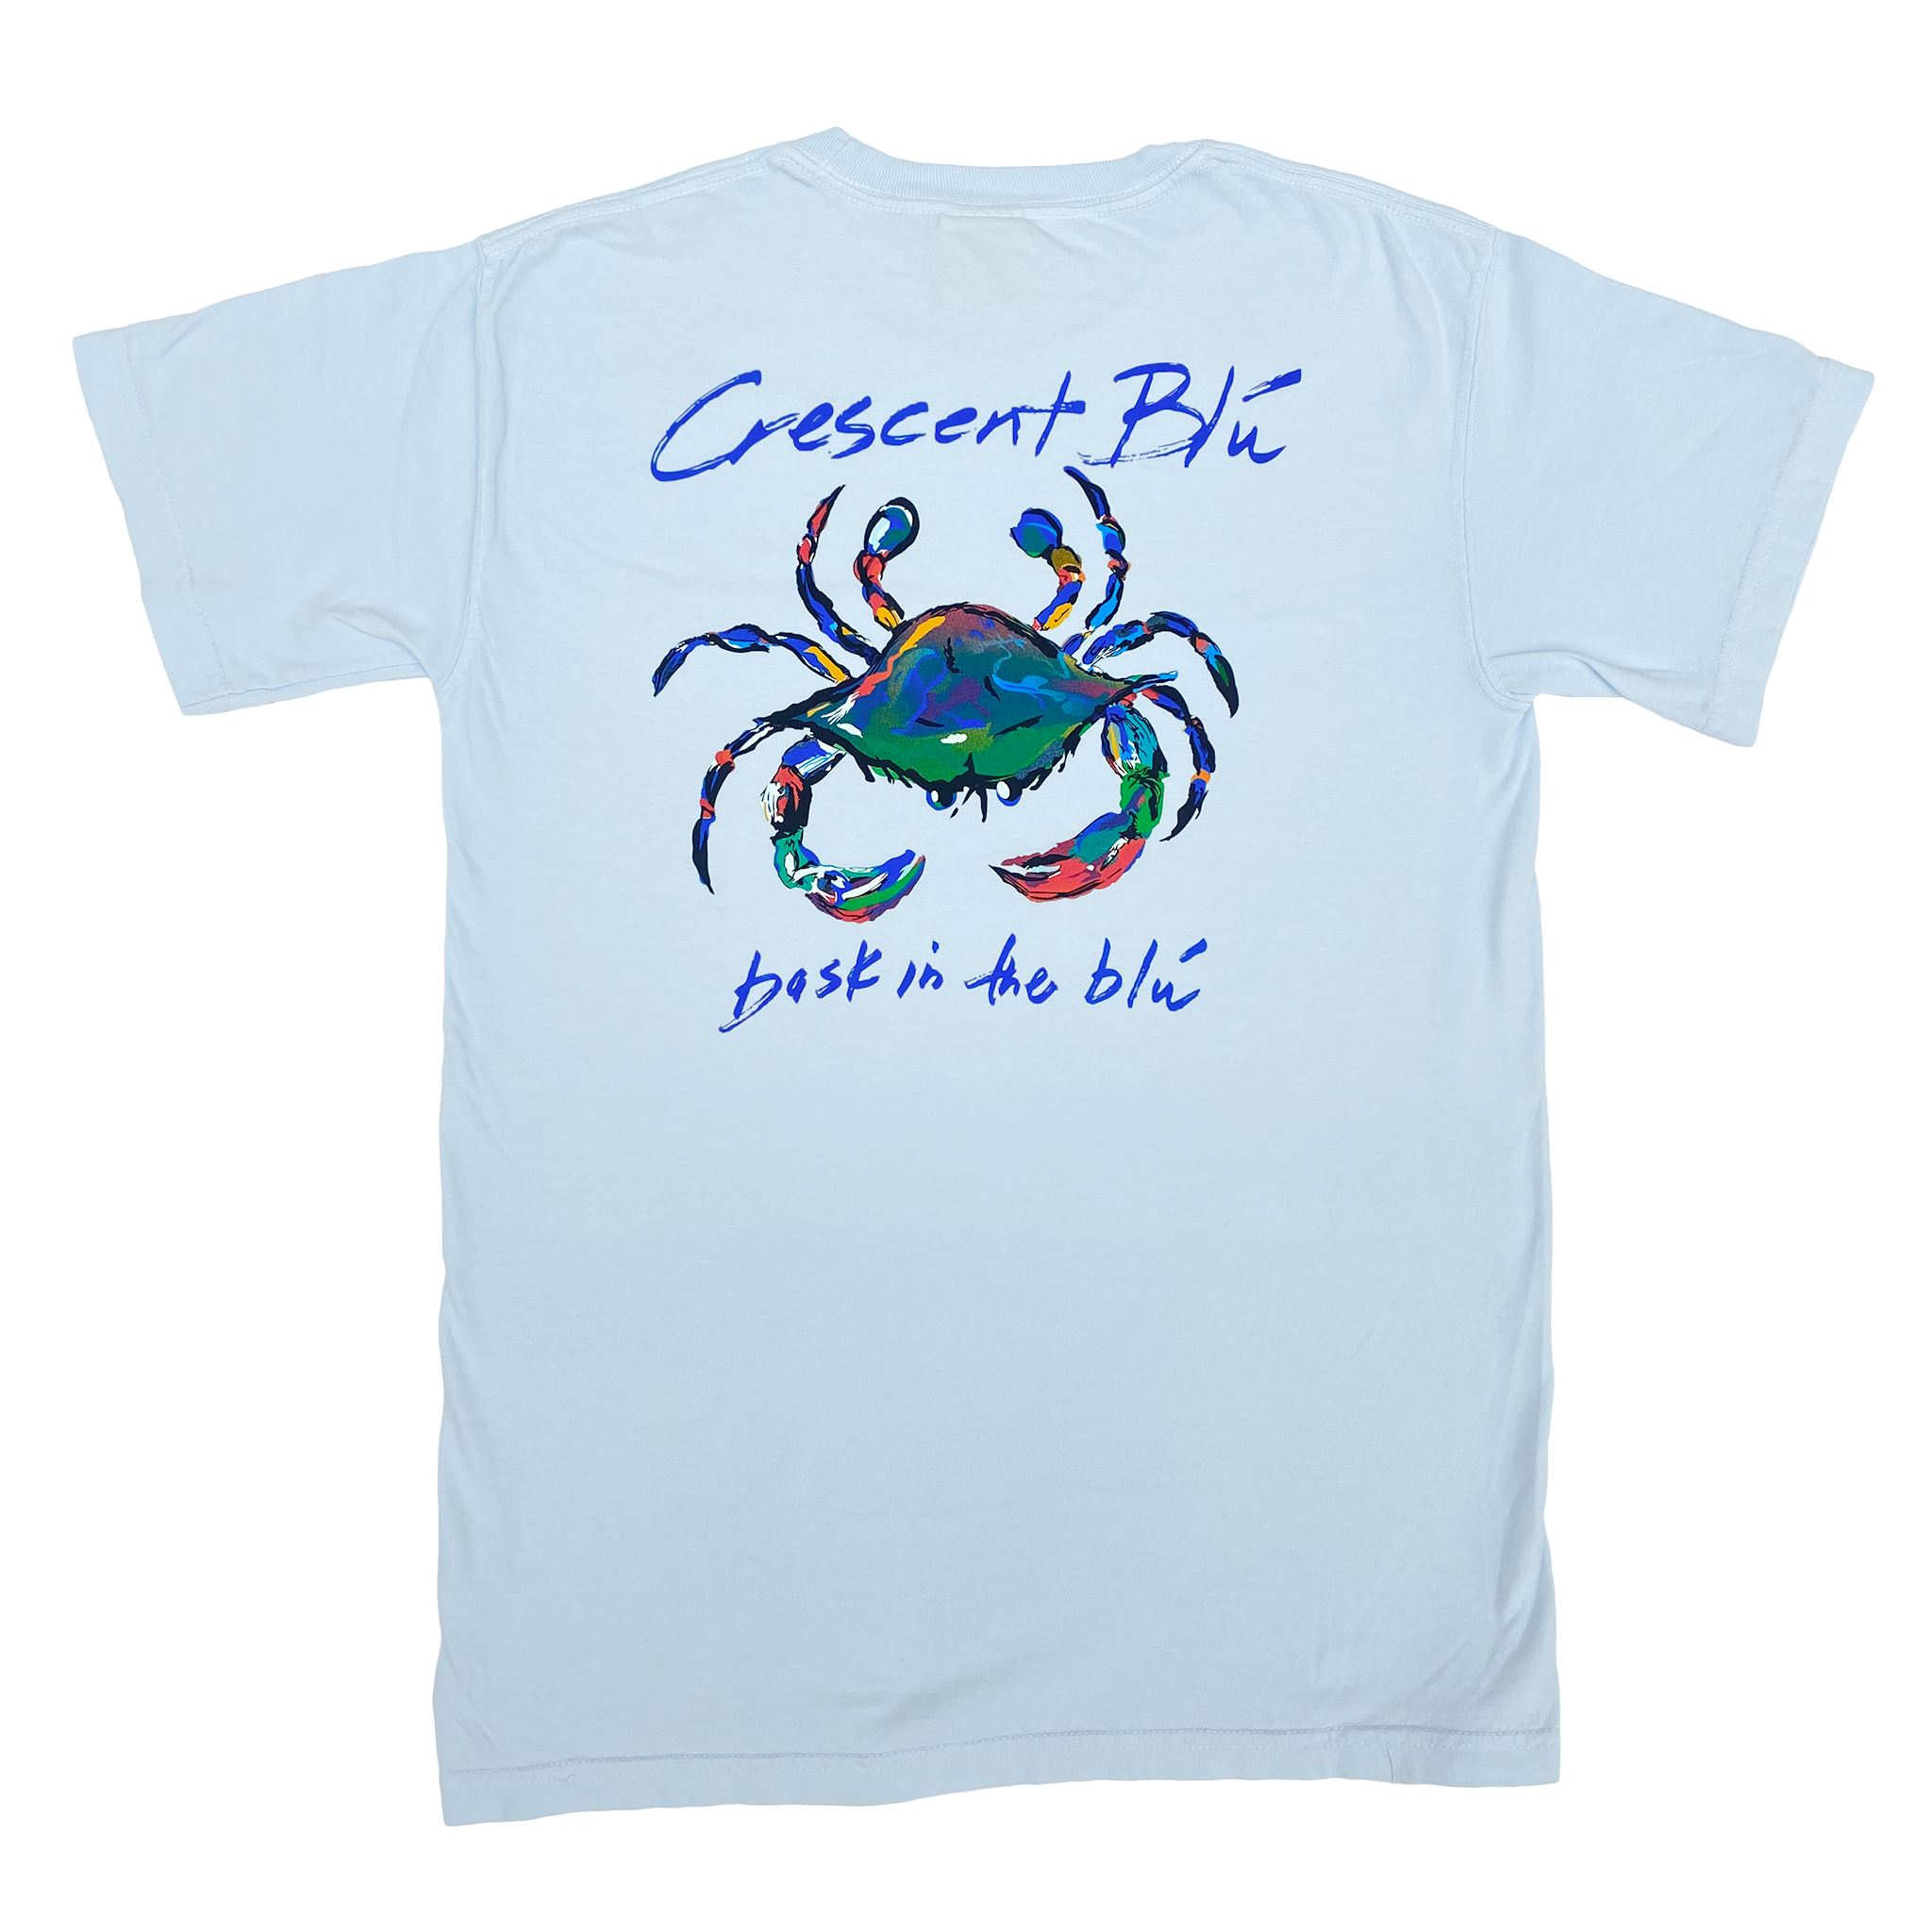 Adult short sleeve t-shirt in chambray color with multi-colored signature crab displayed